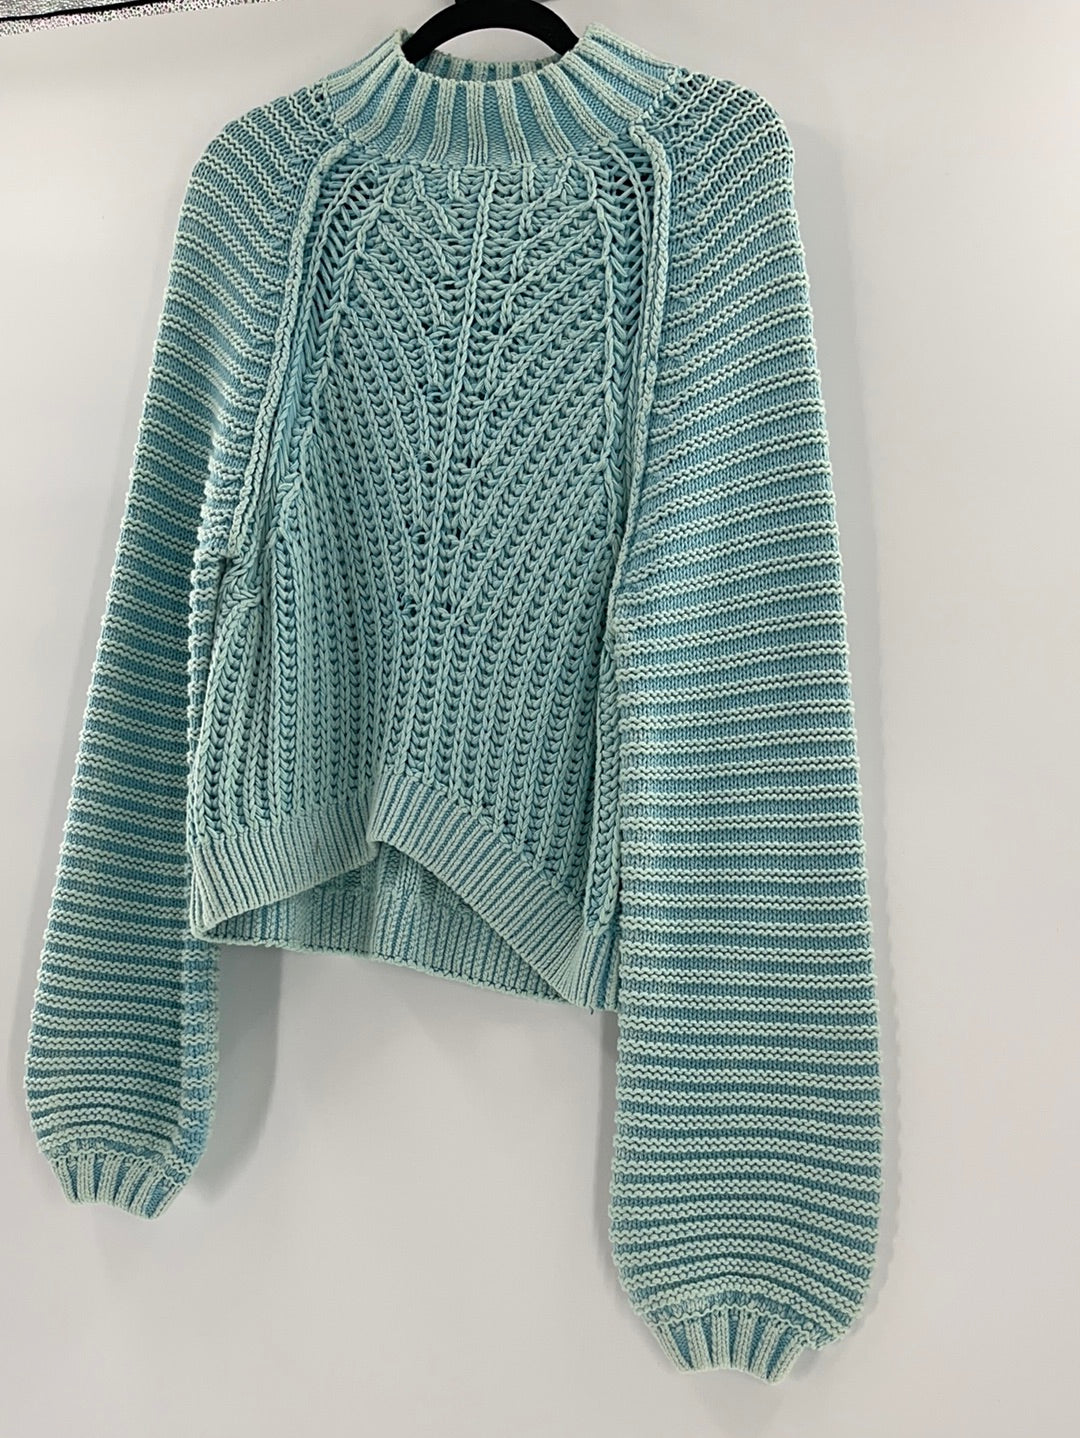 Free People Sweetheart Sweater Chunky Rib Knit Mock Neck Pullover Light Blue (Size Small)